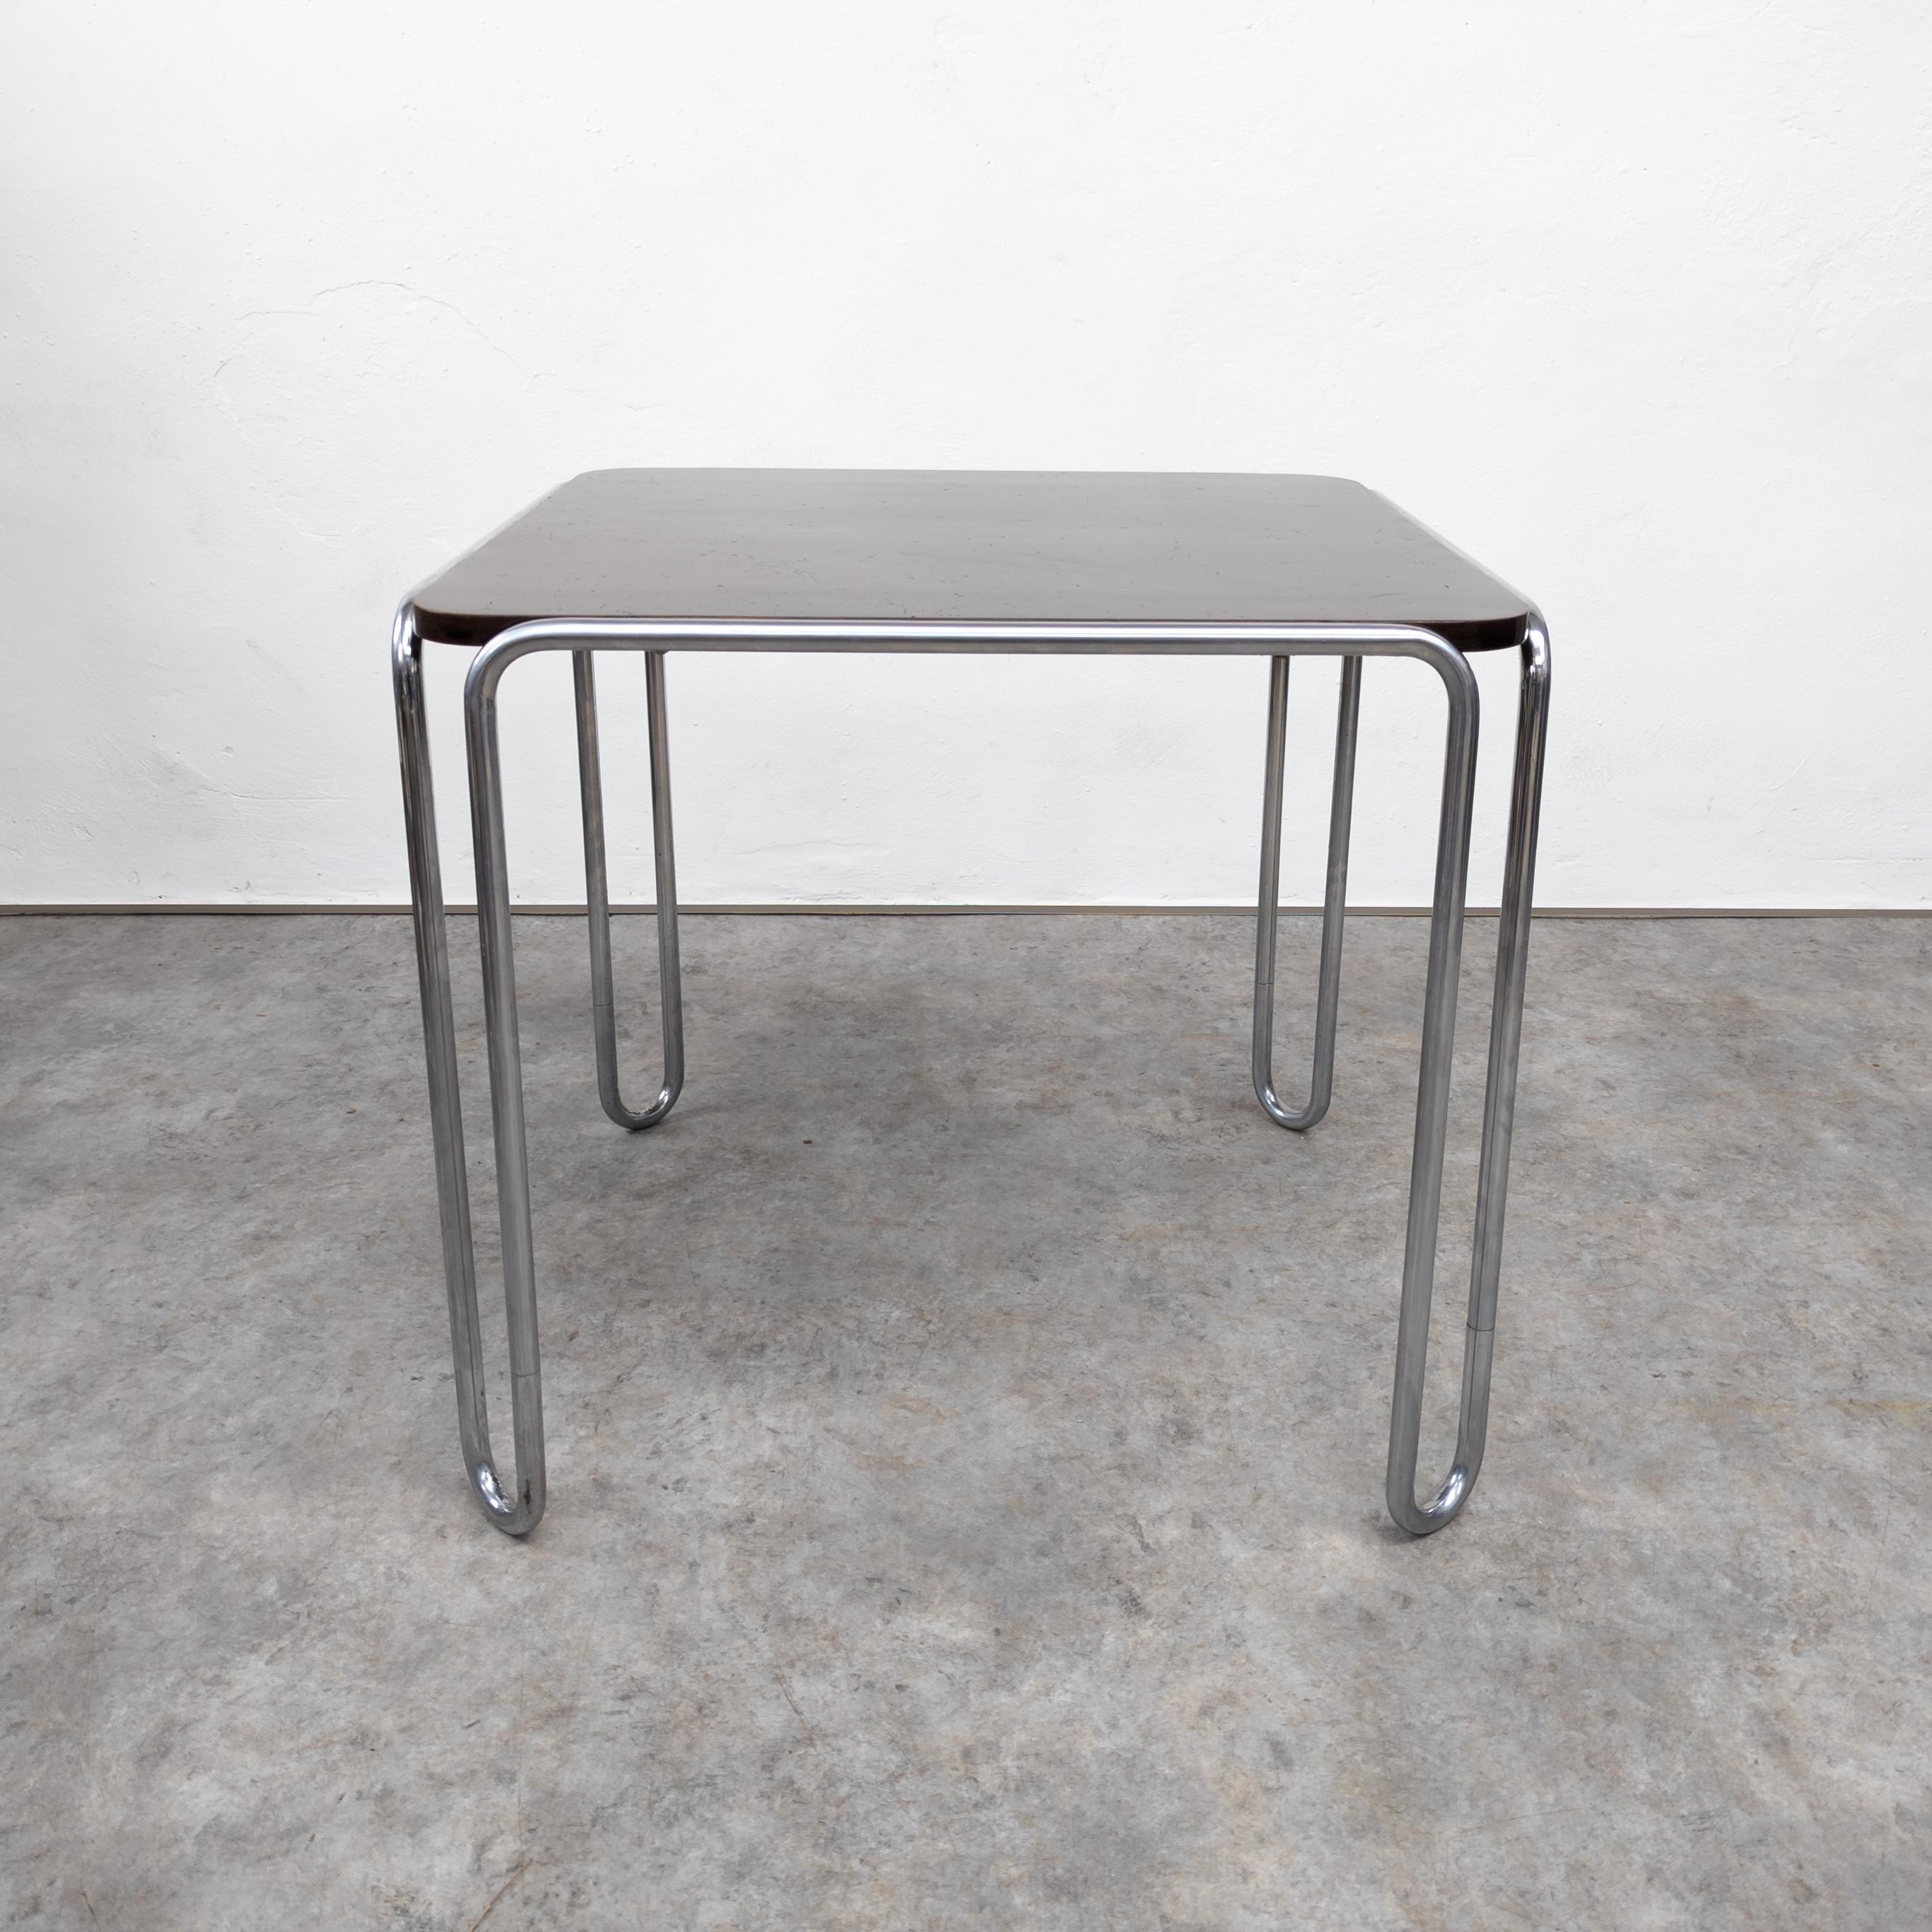 The Thonet B10 table designed by Marcel Breuer is an iconic piece of modernist furniture. It features a sleek, tubular steel frame with a  wooden top, embodying the Bauhaus principles of simplicity, functionality, and geometric forms. The design is